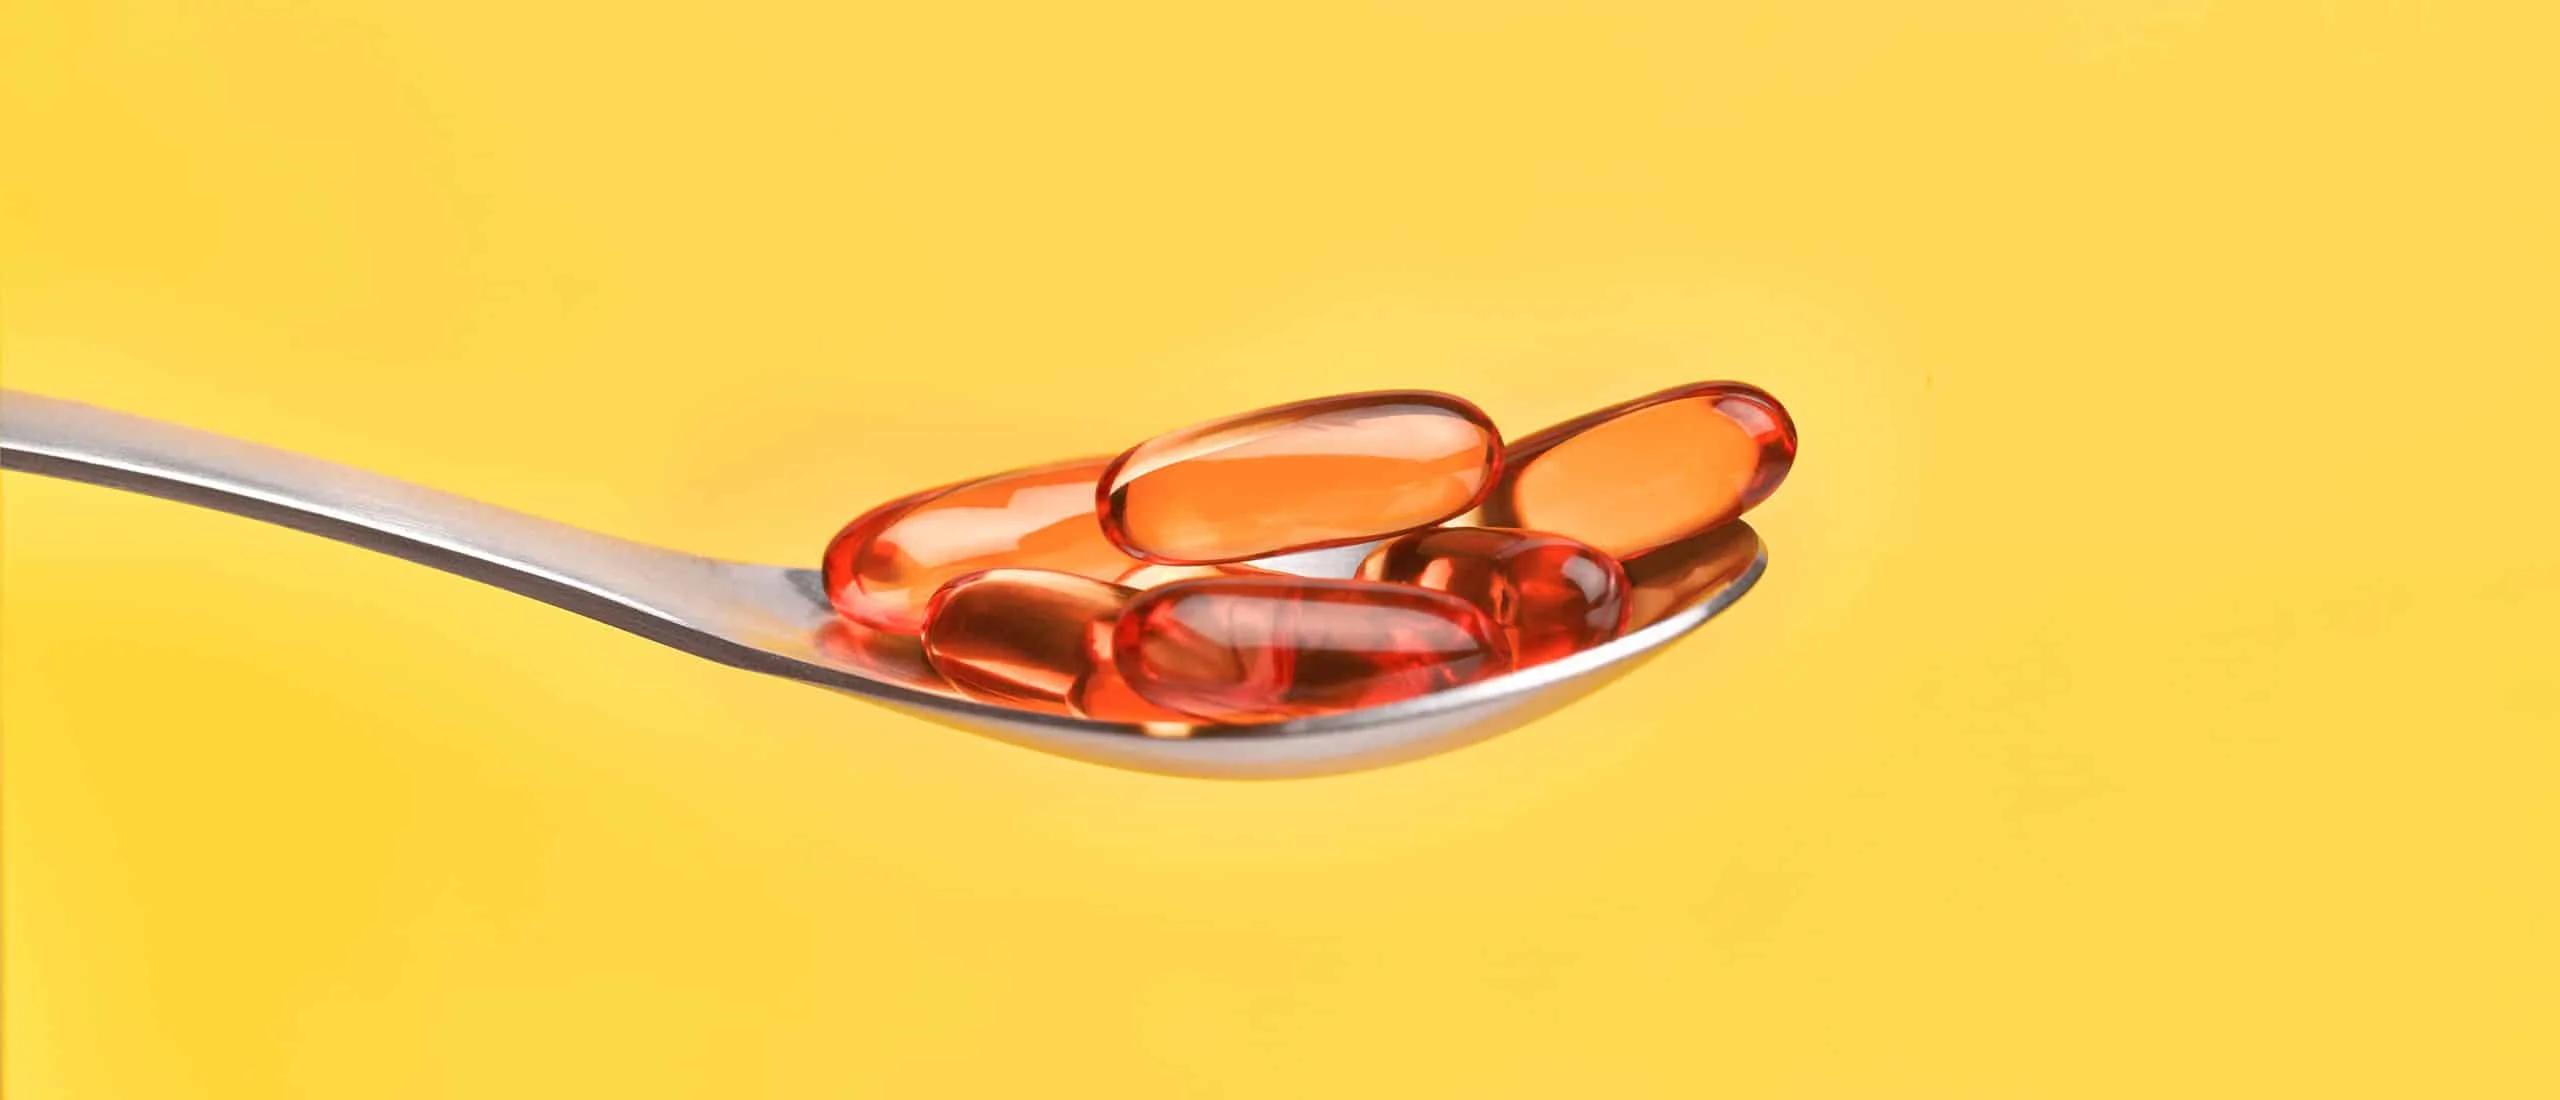 A spoon with vitamin D capsules on it